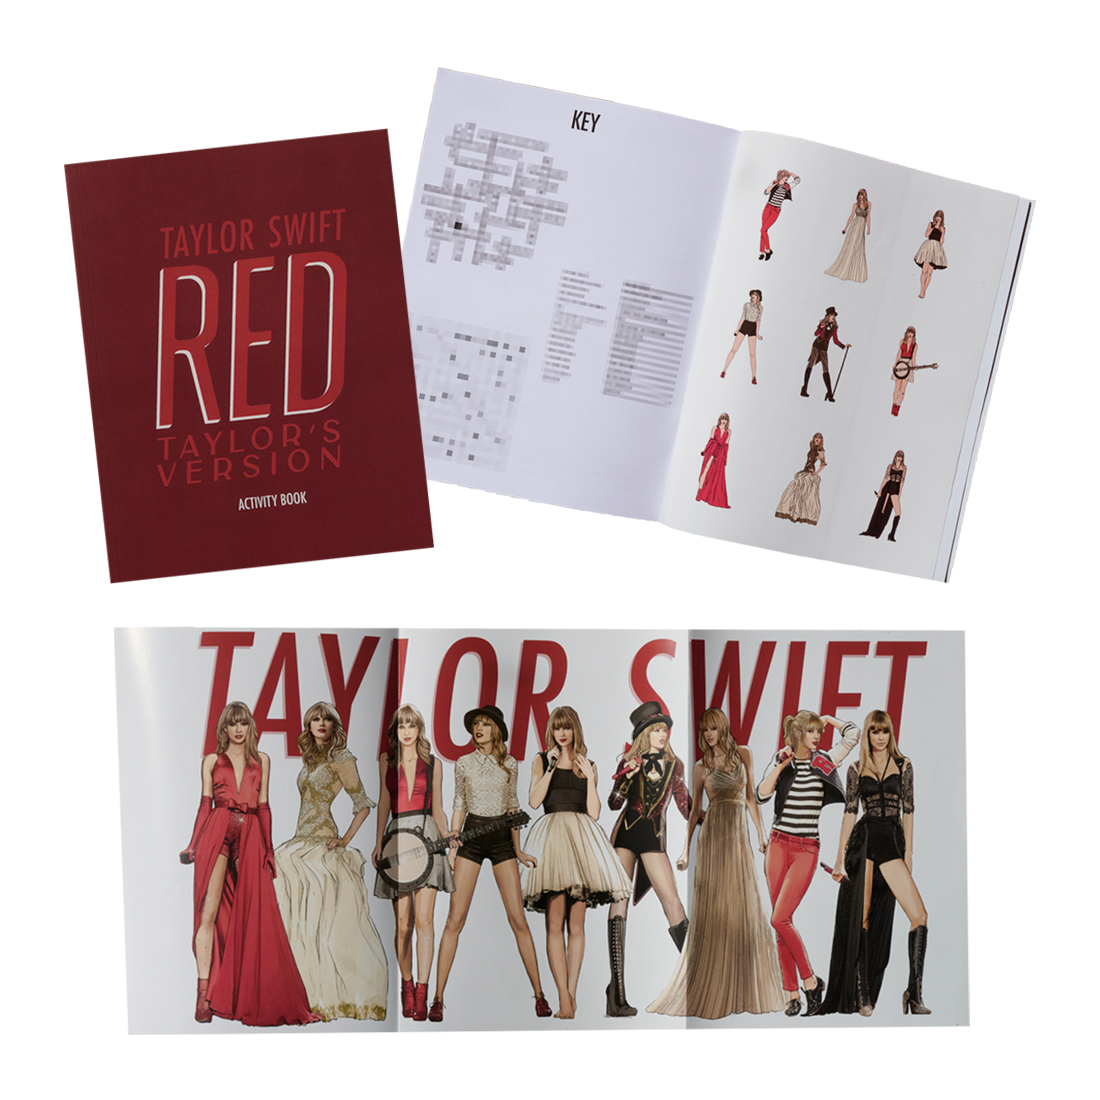 Taylor Swift - Red (Taylor's Version) Eras Activity Book